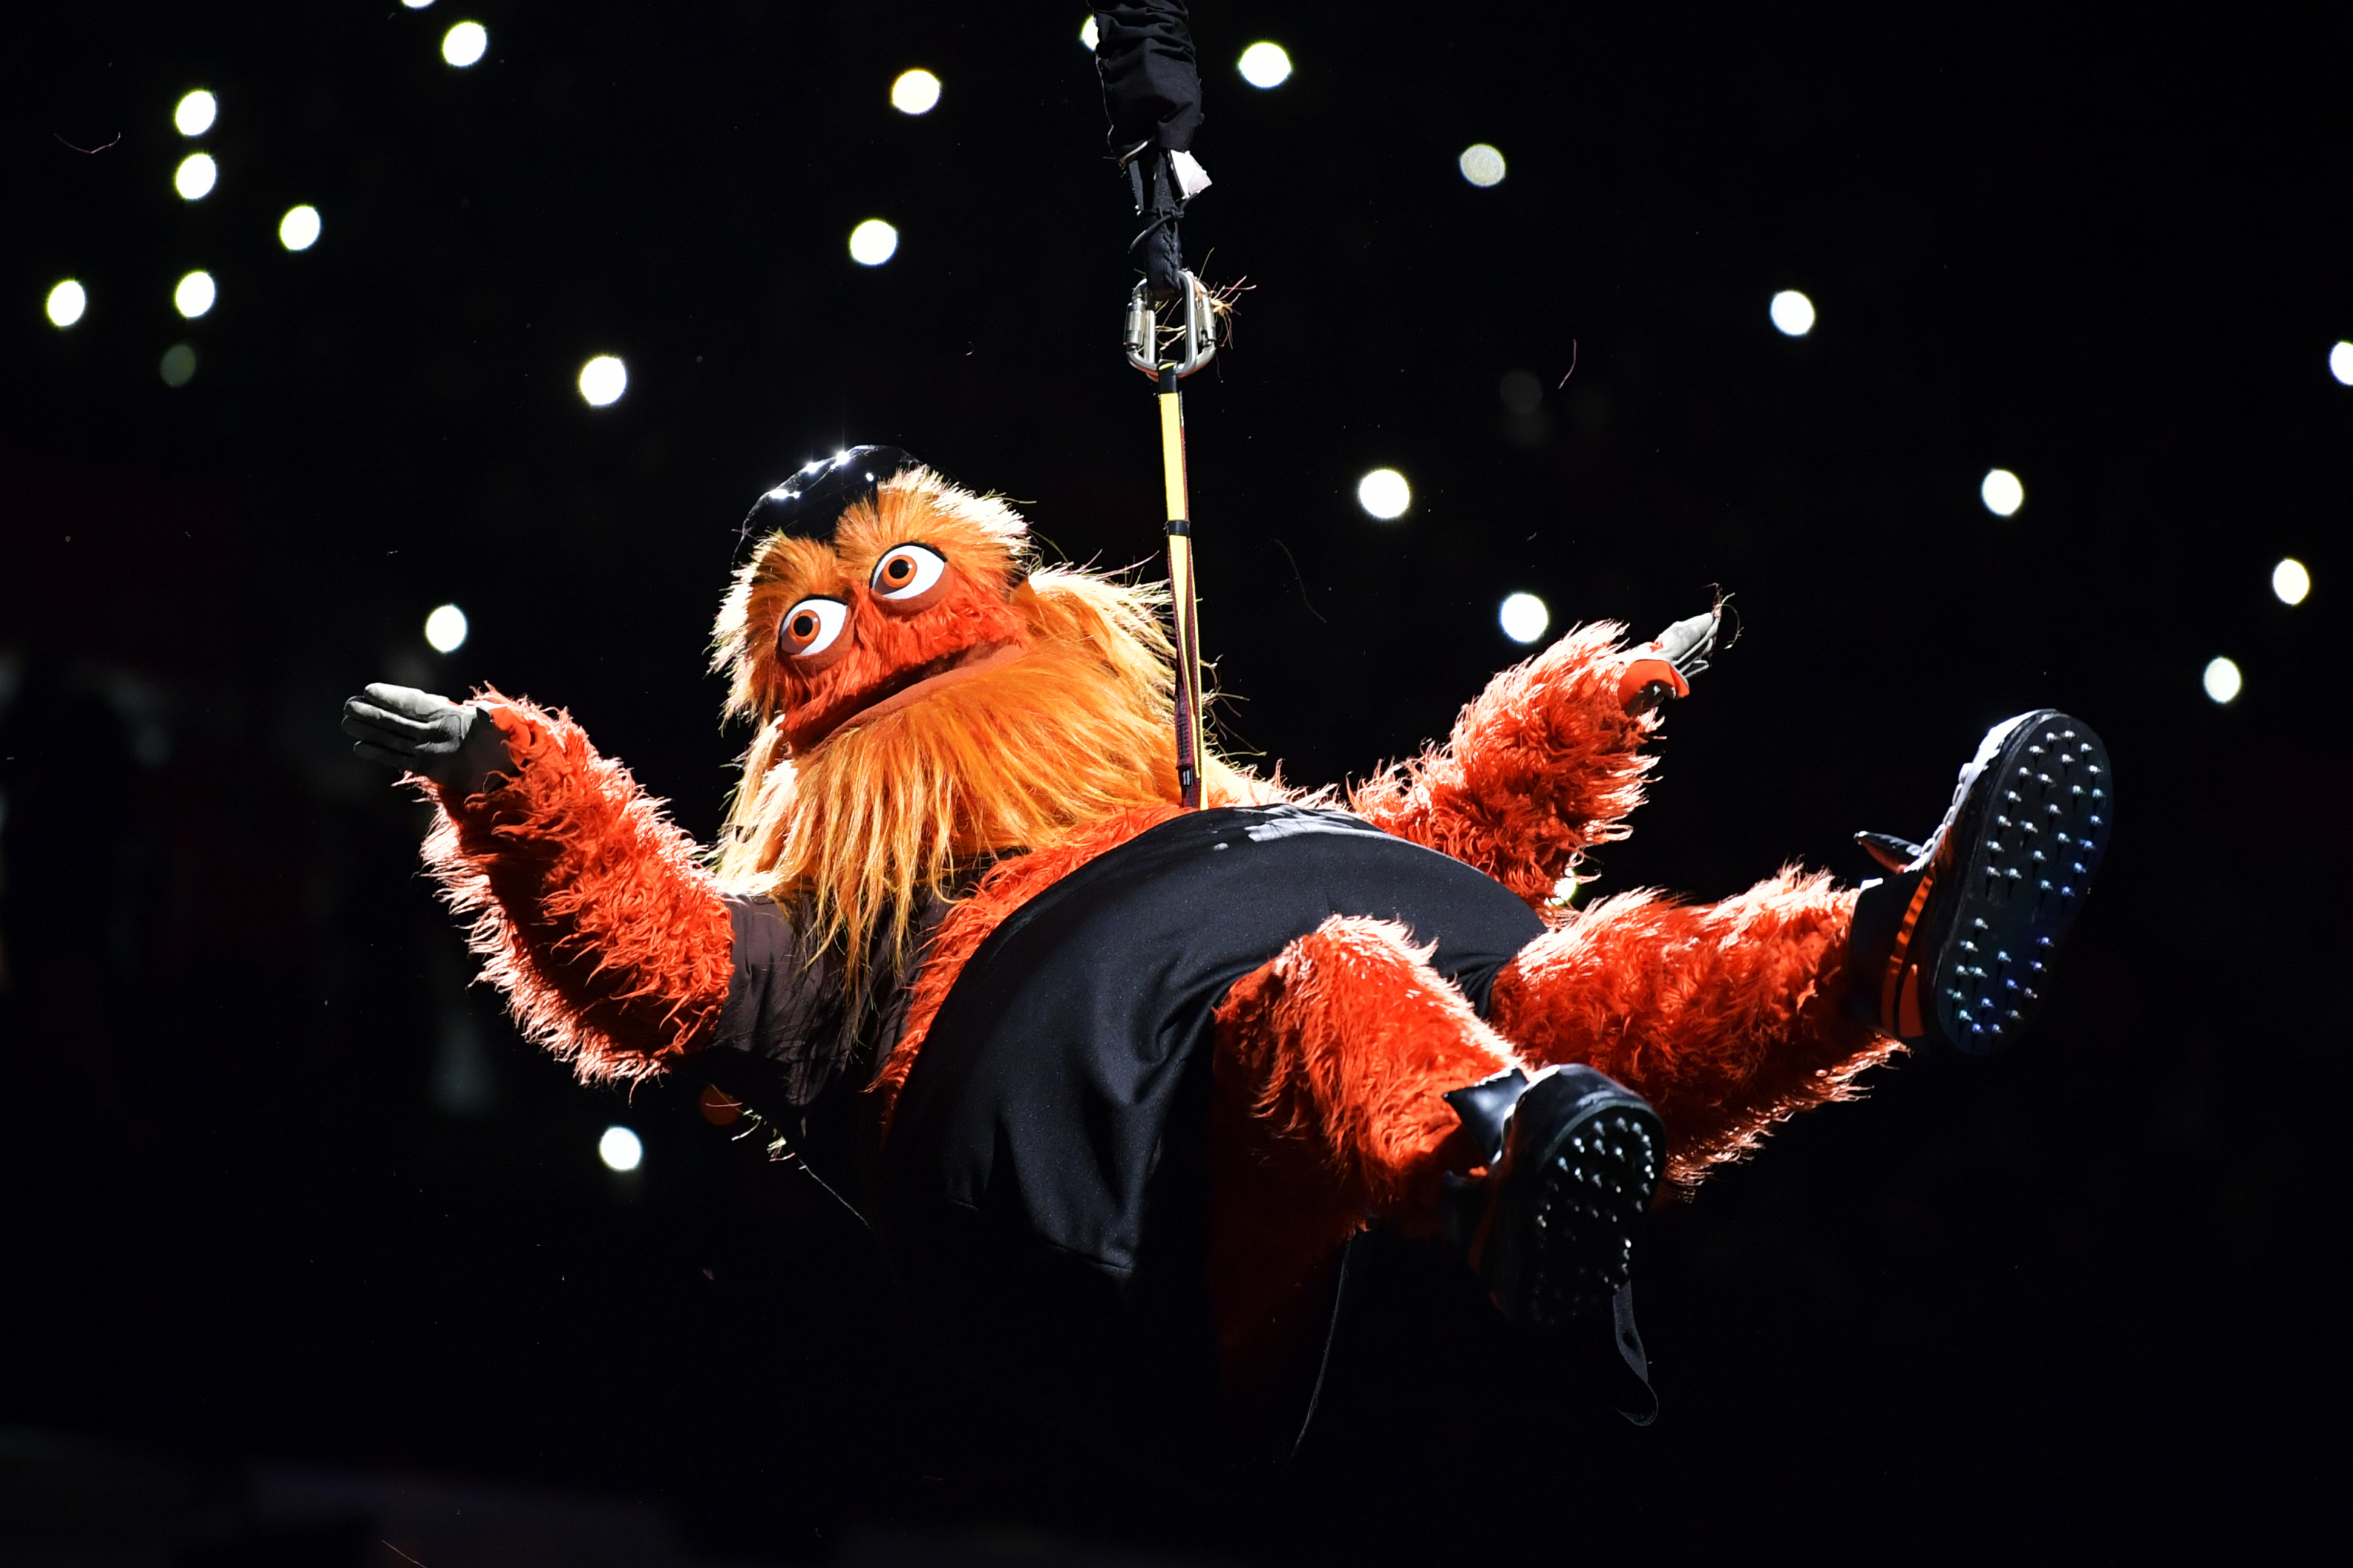 The Flyers are debuting their horrifying new mascot Monday night